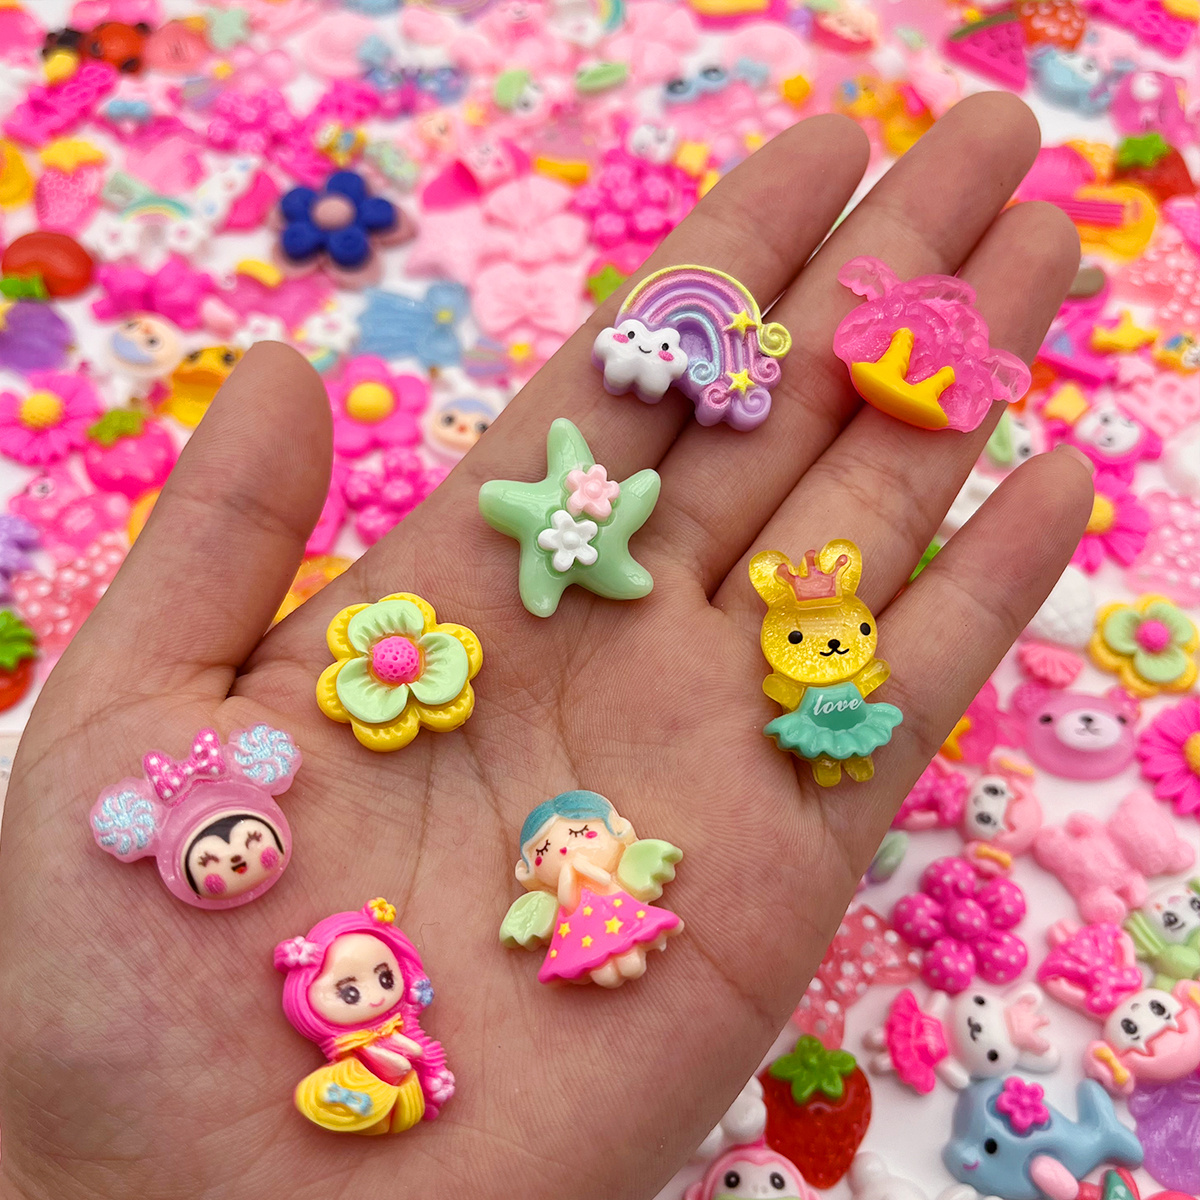 Wayees 50pcs Flatbacks Resin Embellishments DIY Kawaii Hair Clips Hairbows Charms Easter Art Crafting Bows Making Decoden Cell Phone Cases Jewery